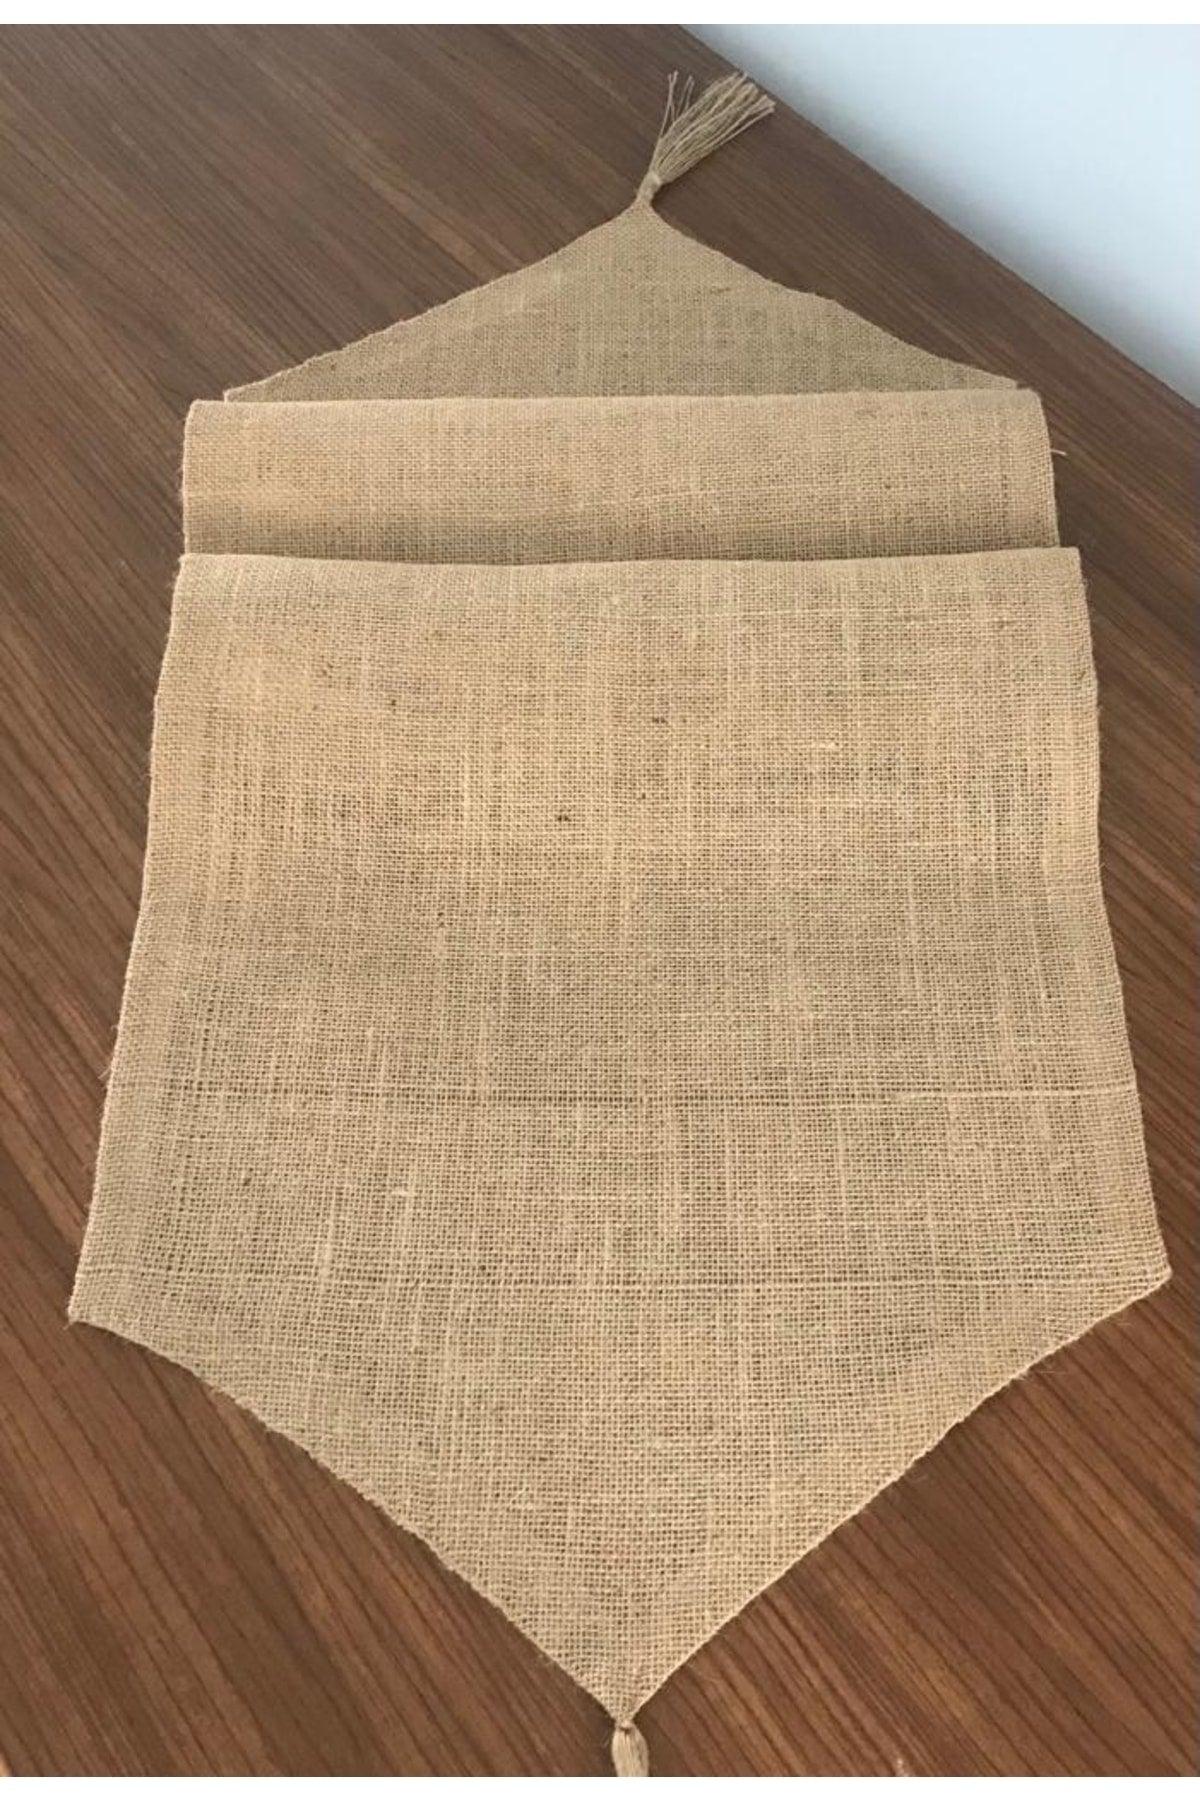 Straw Jute Runner Table Cloth Decorative Kitchen Table Cloth Fabric Cover Home Decoration Living Room Decoration - Swordslife